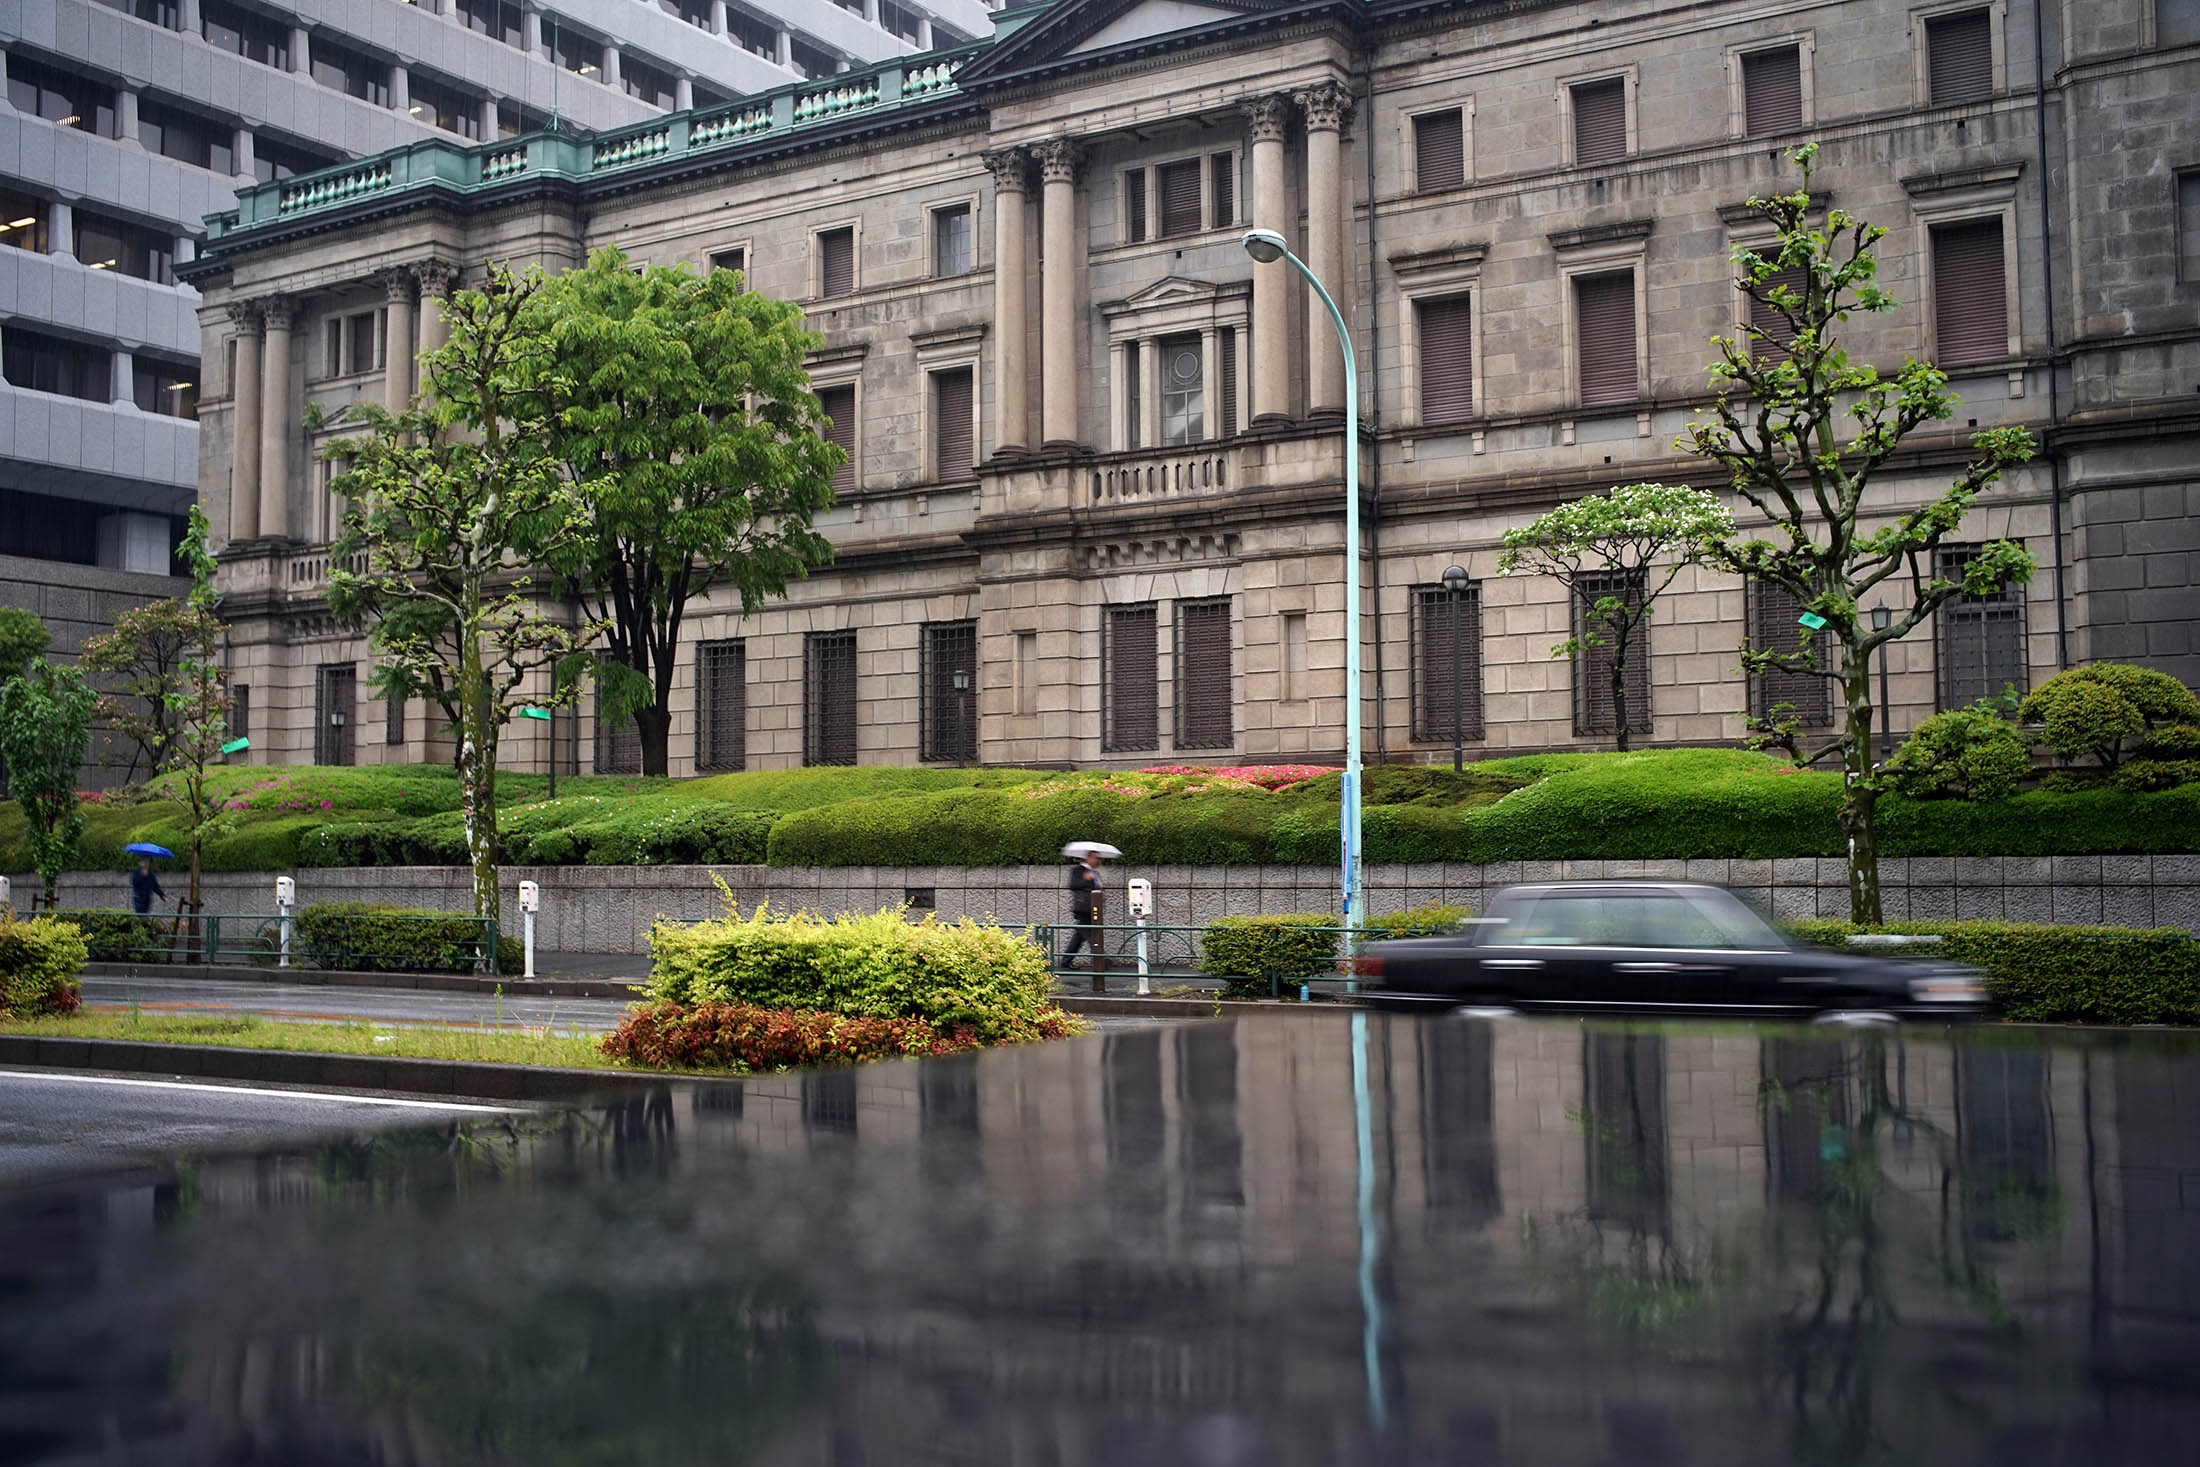 The Bank of Japan building in Tokyo.
